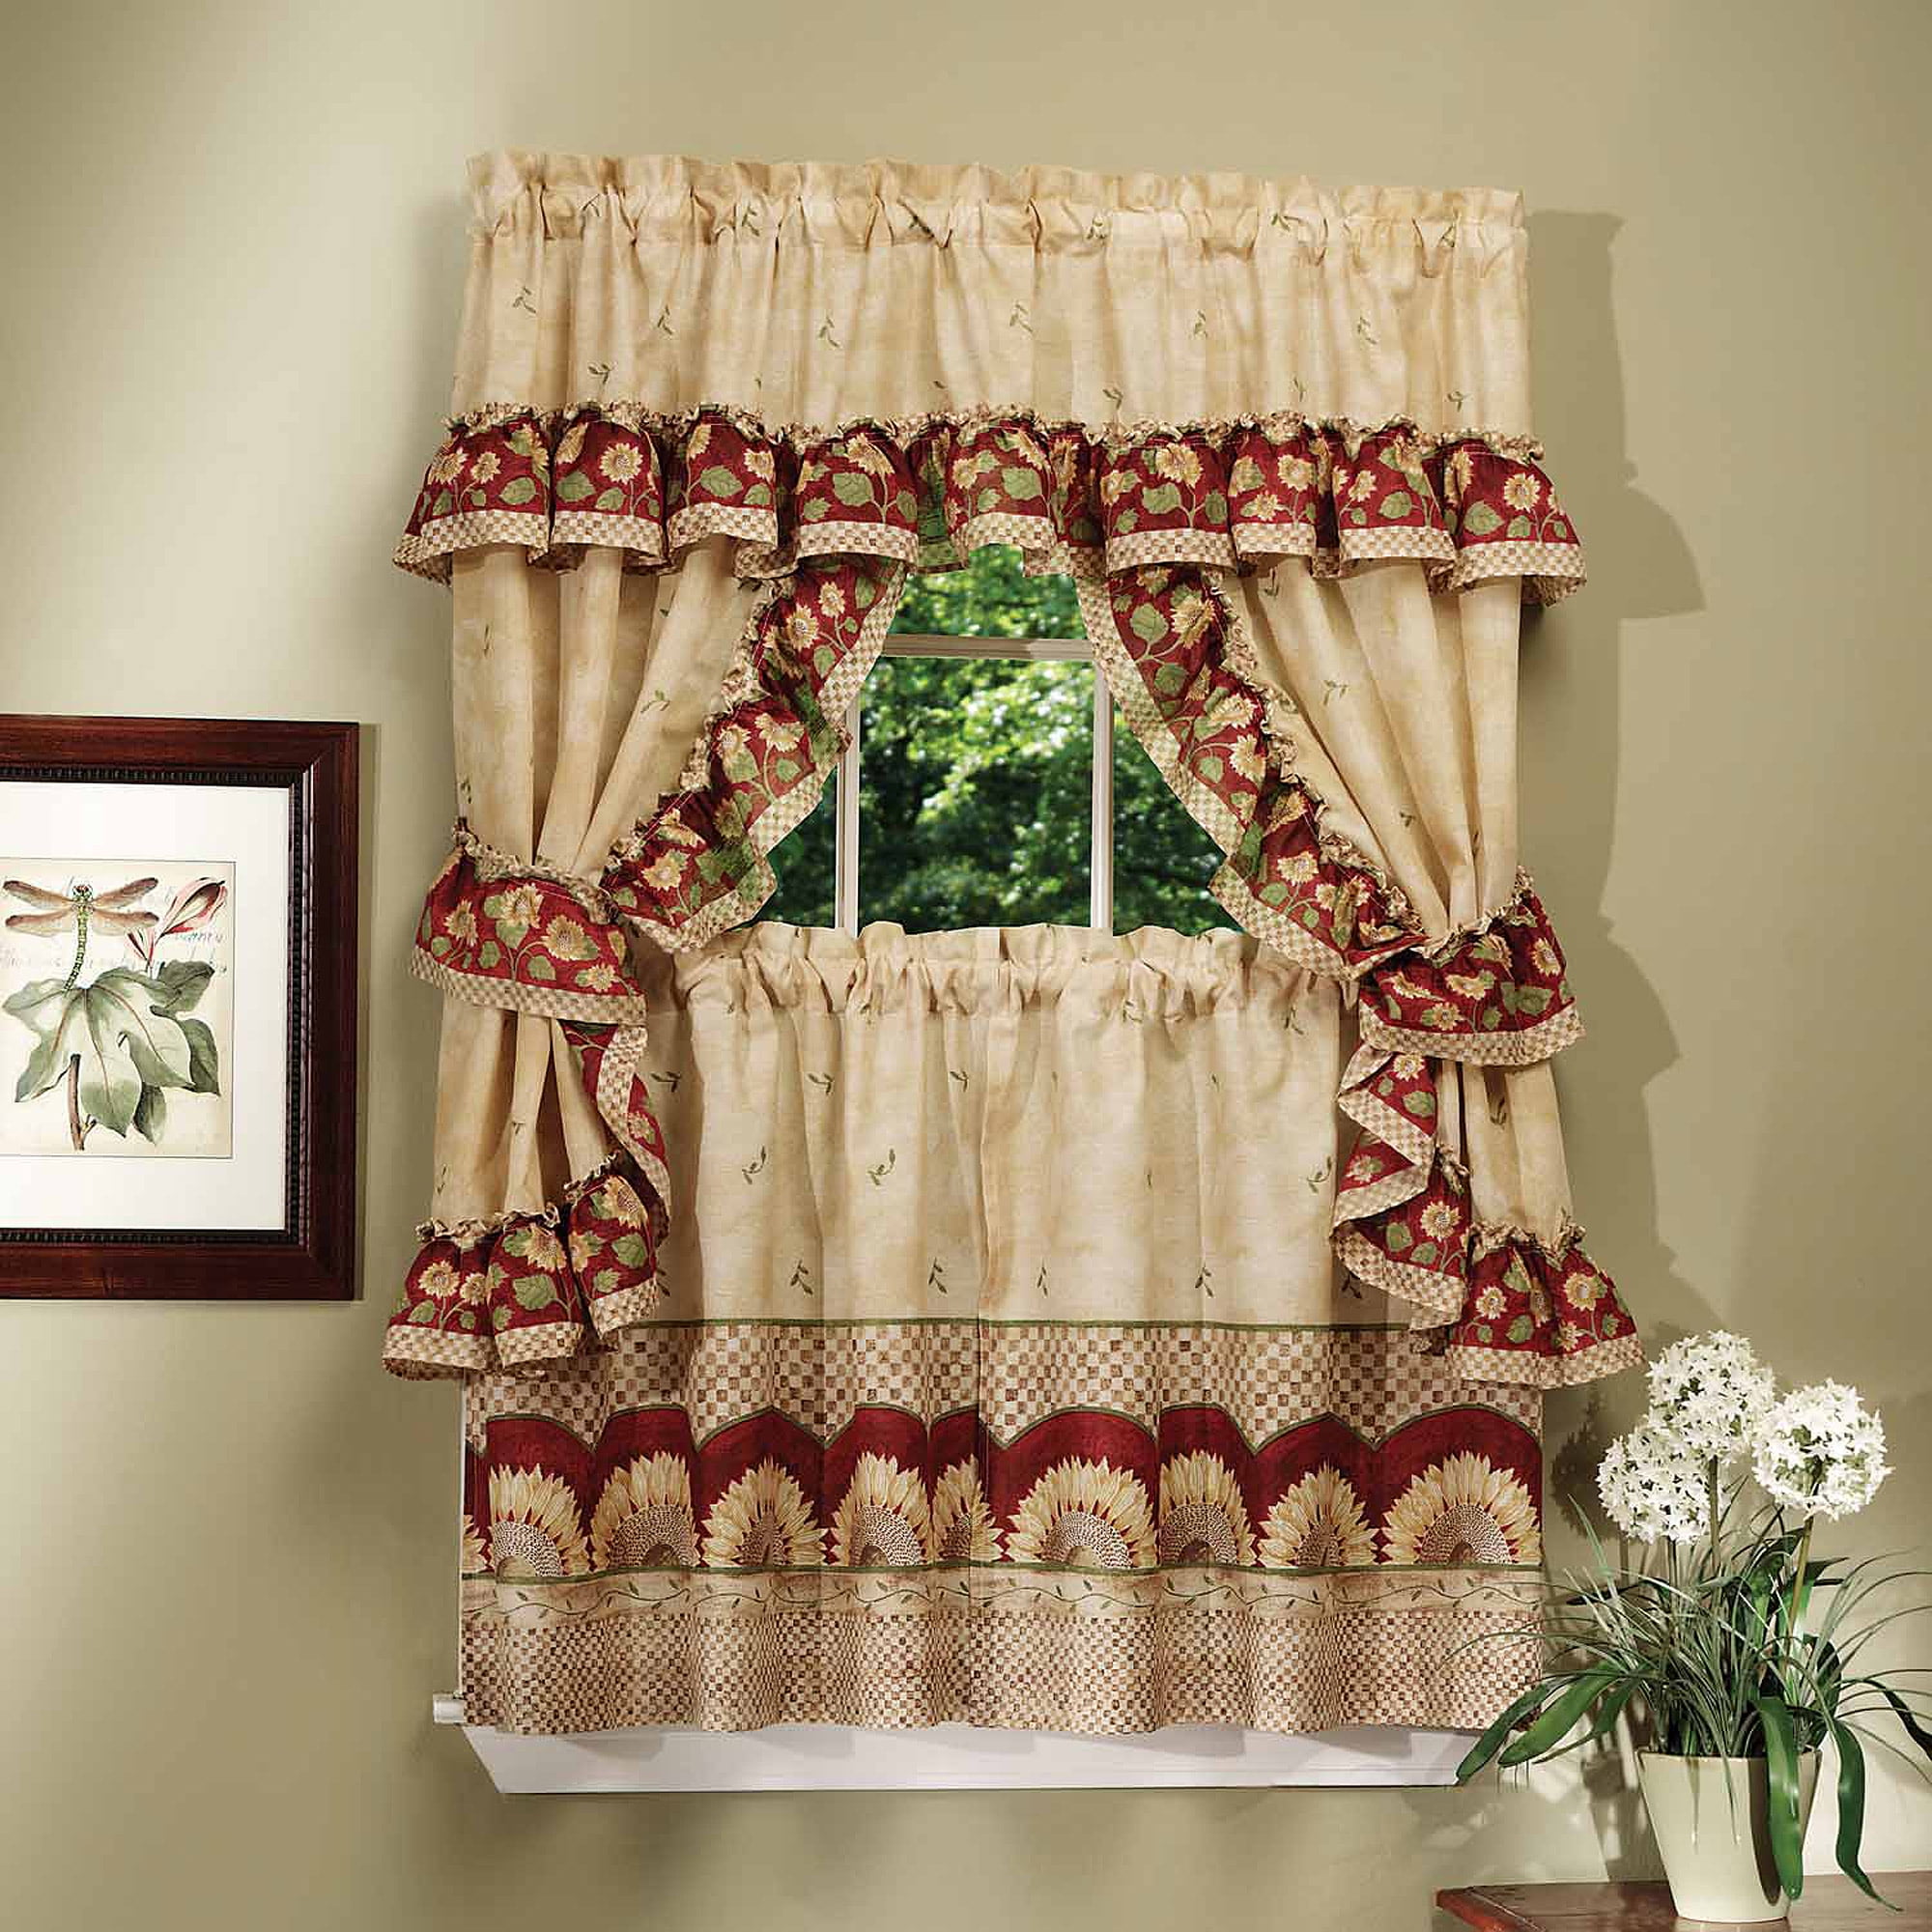 Top Swag Tiebacks Complete Window Kitchen Cottage Curtain Set with Tier Panels 